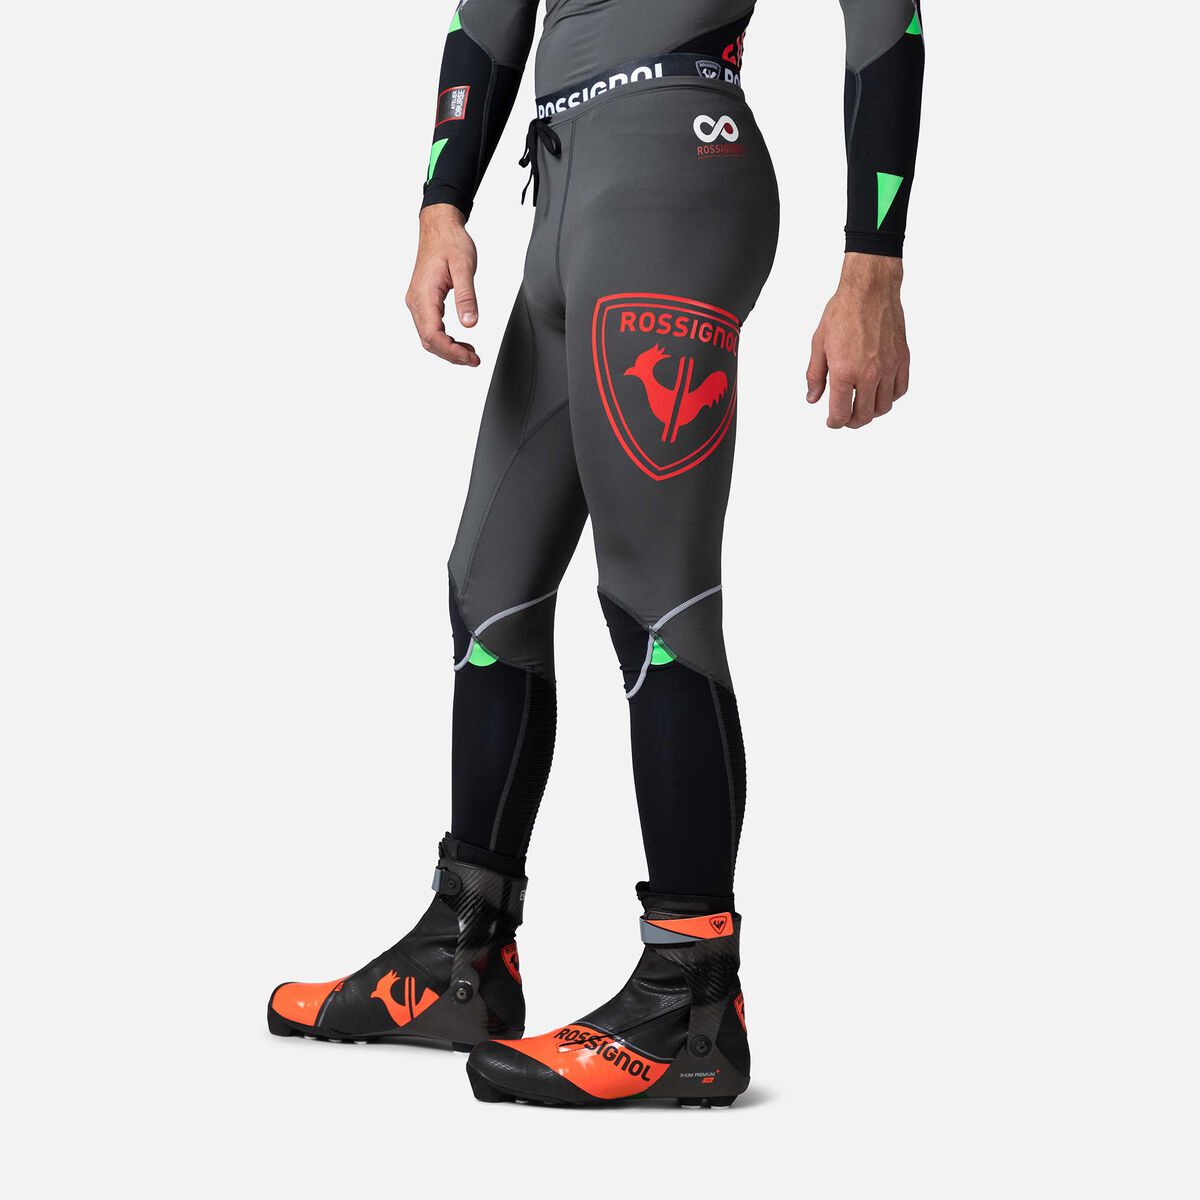 Buy Rossignol Infini Compression Race Longsleeve online at Sport